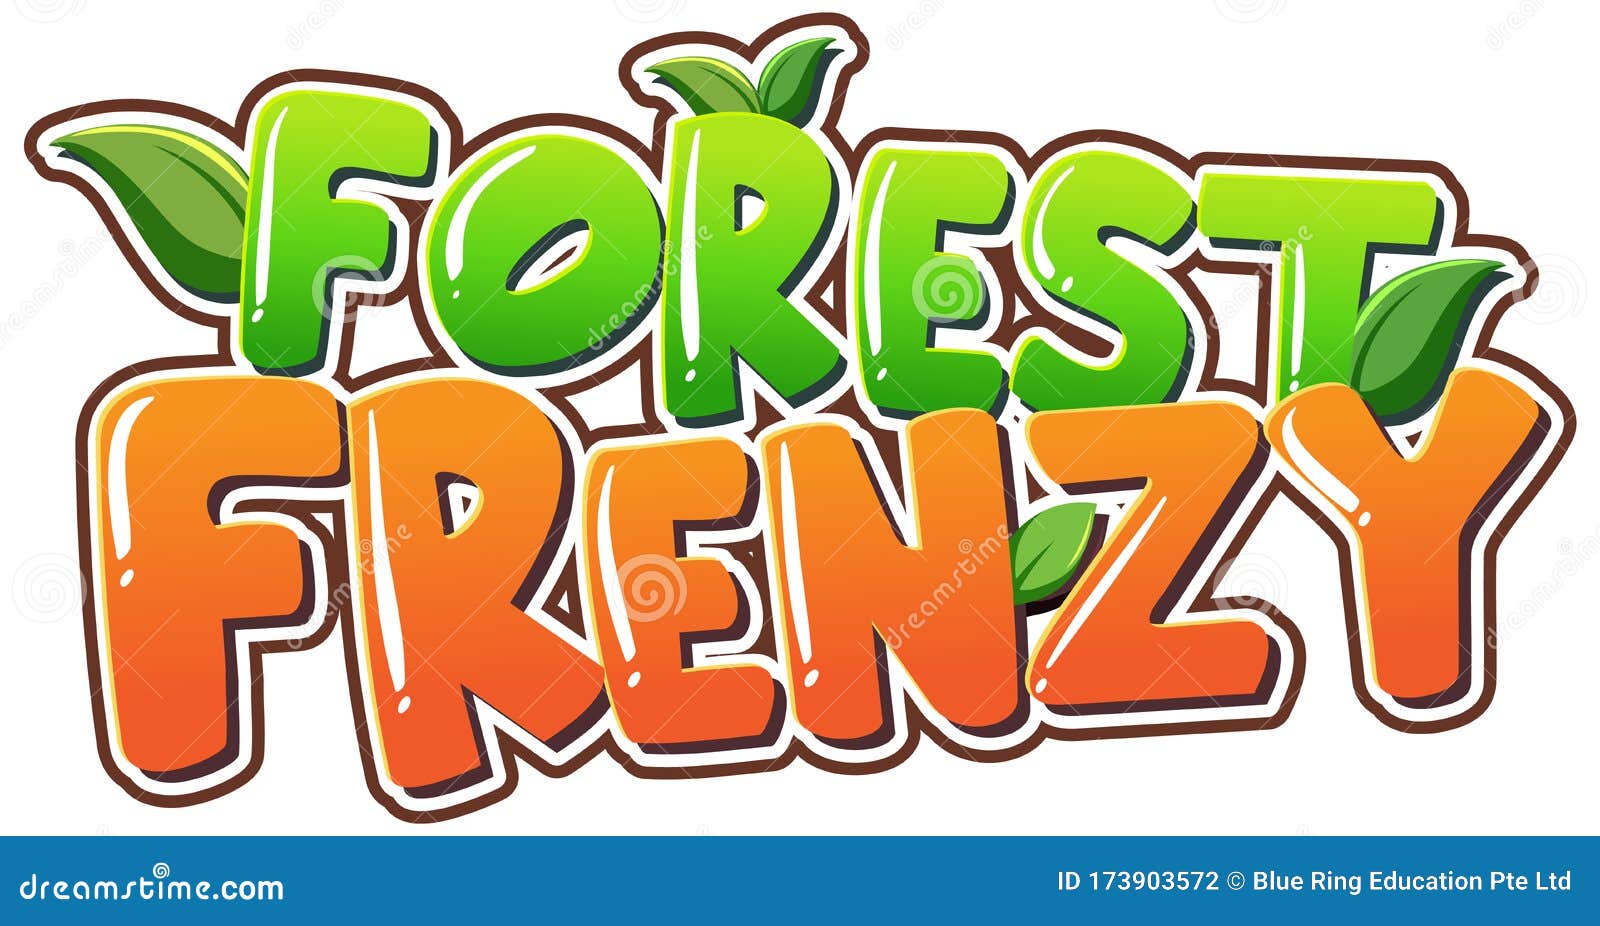 "Forest Frenzy" - wide 8